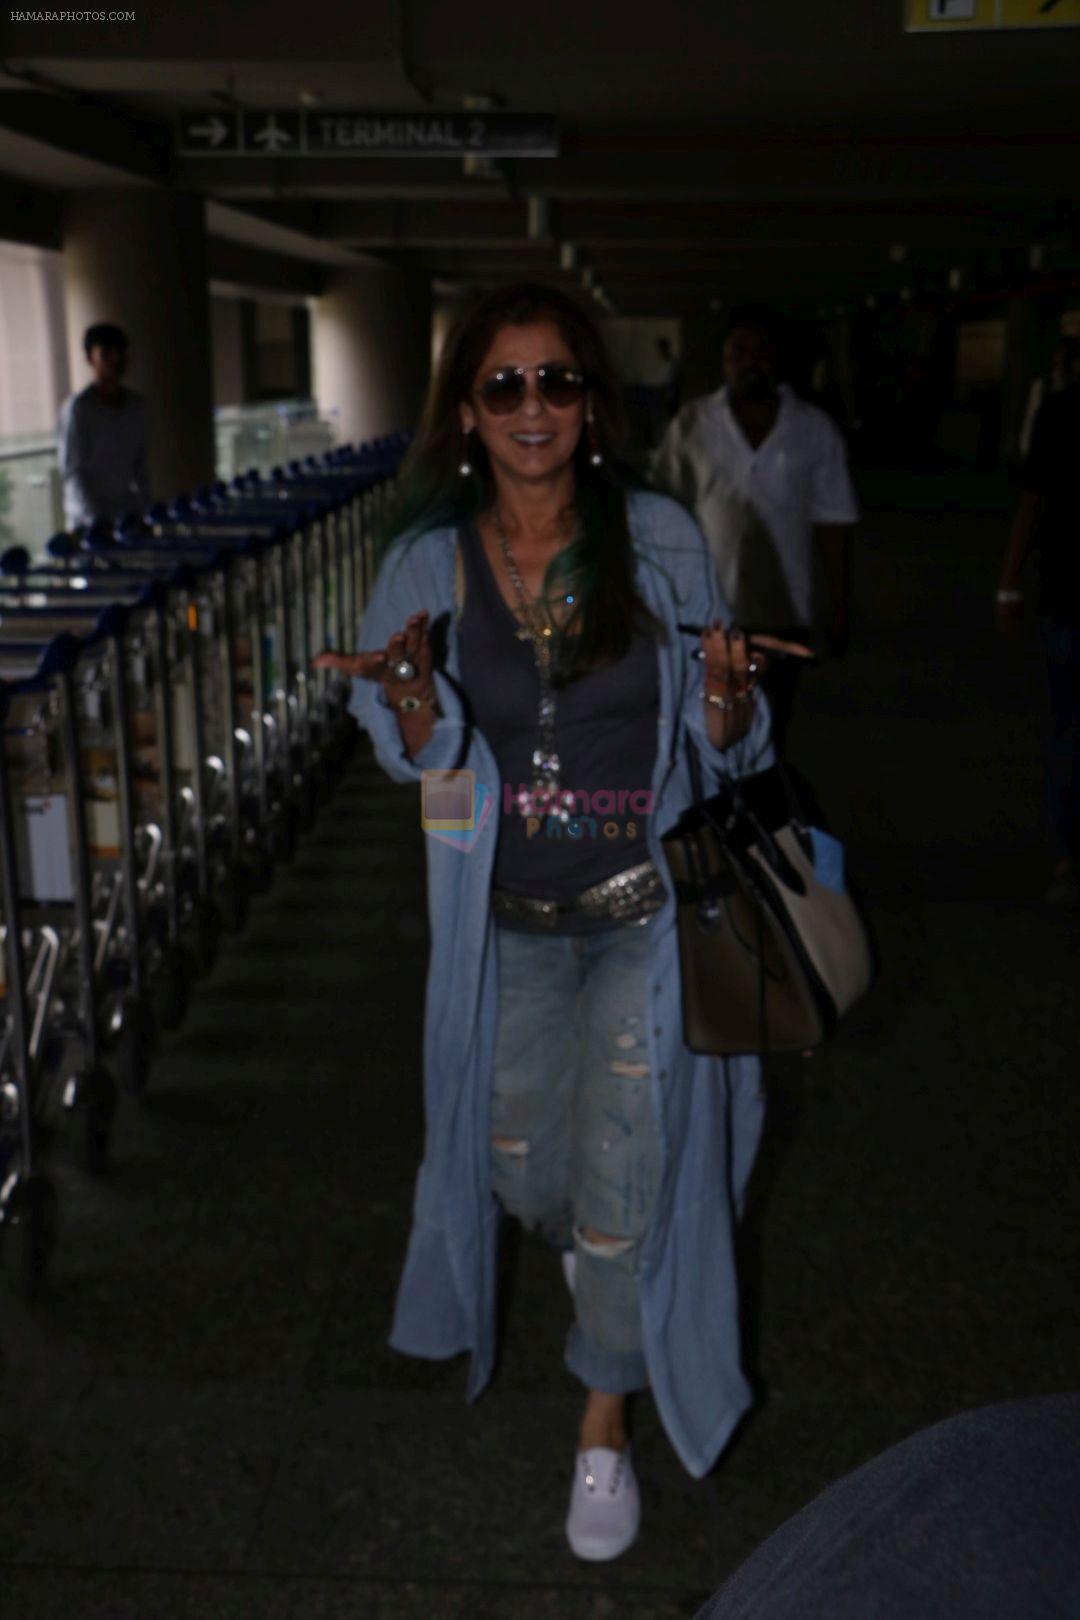 Dimple Kapadia spotted at the Airport on 10th July 2017